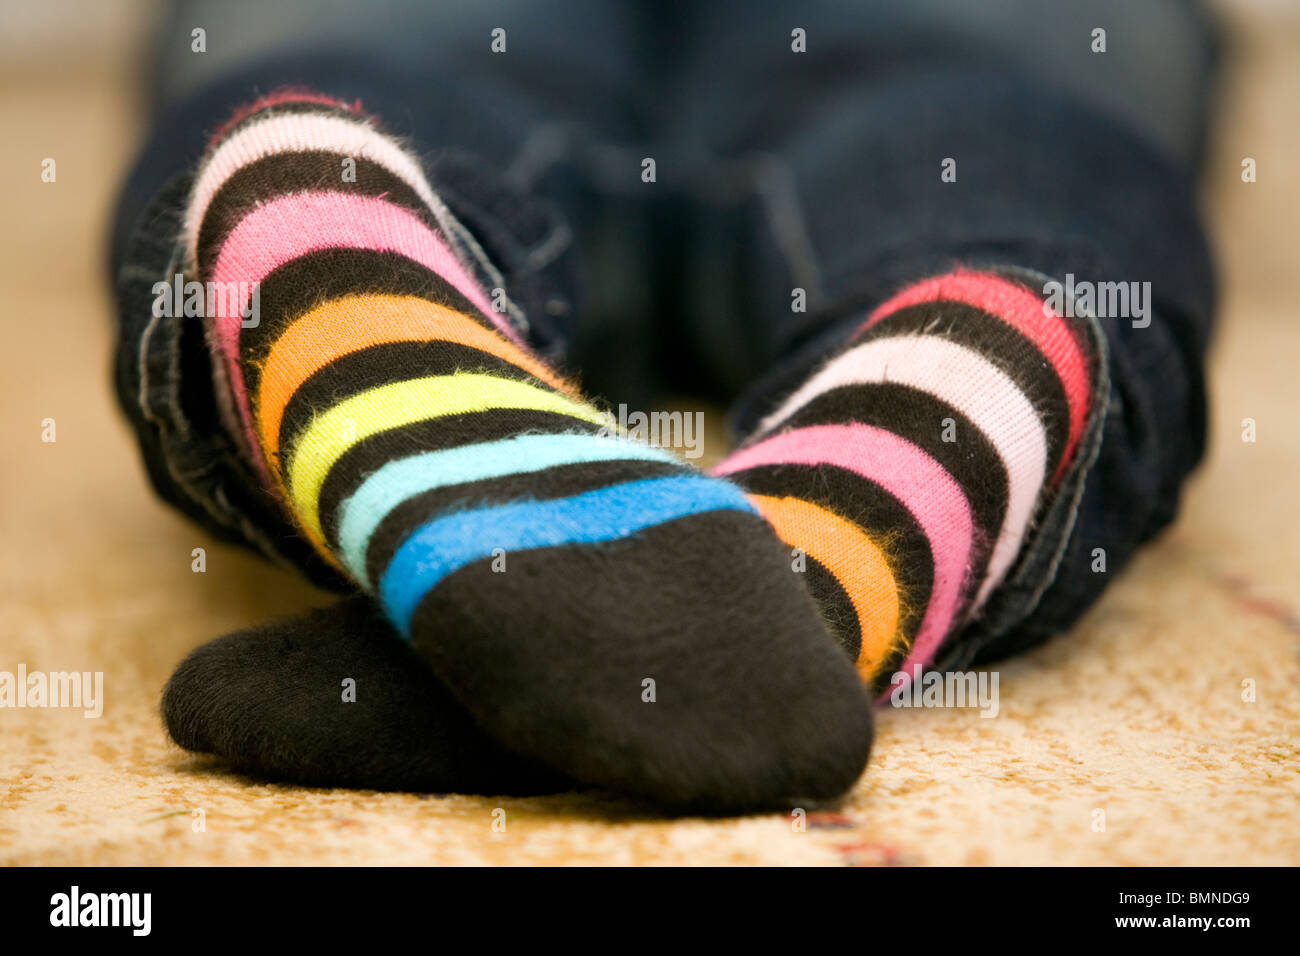 Teenager lies on floor with feet in view. Stock Photo